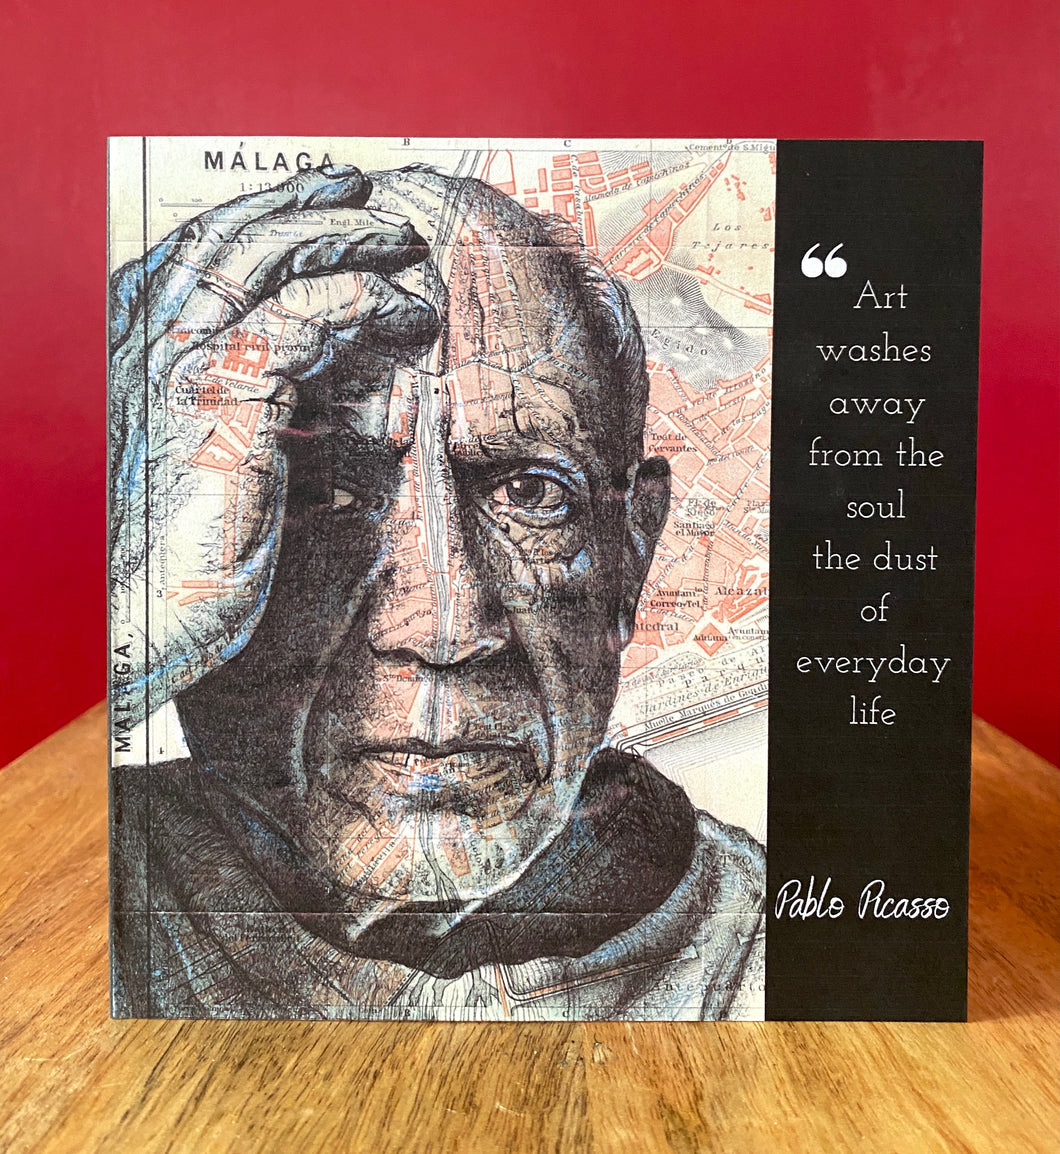 Pablo Picasso Greeting Card. Printed drawing over map of Malaga. Blank inside